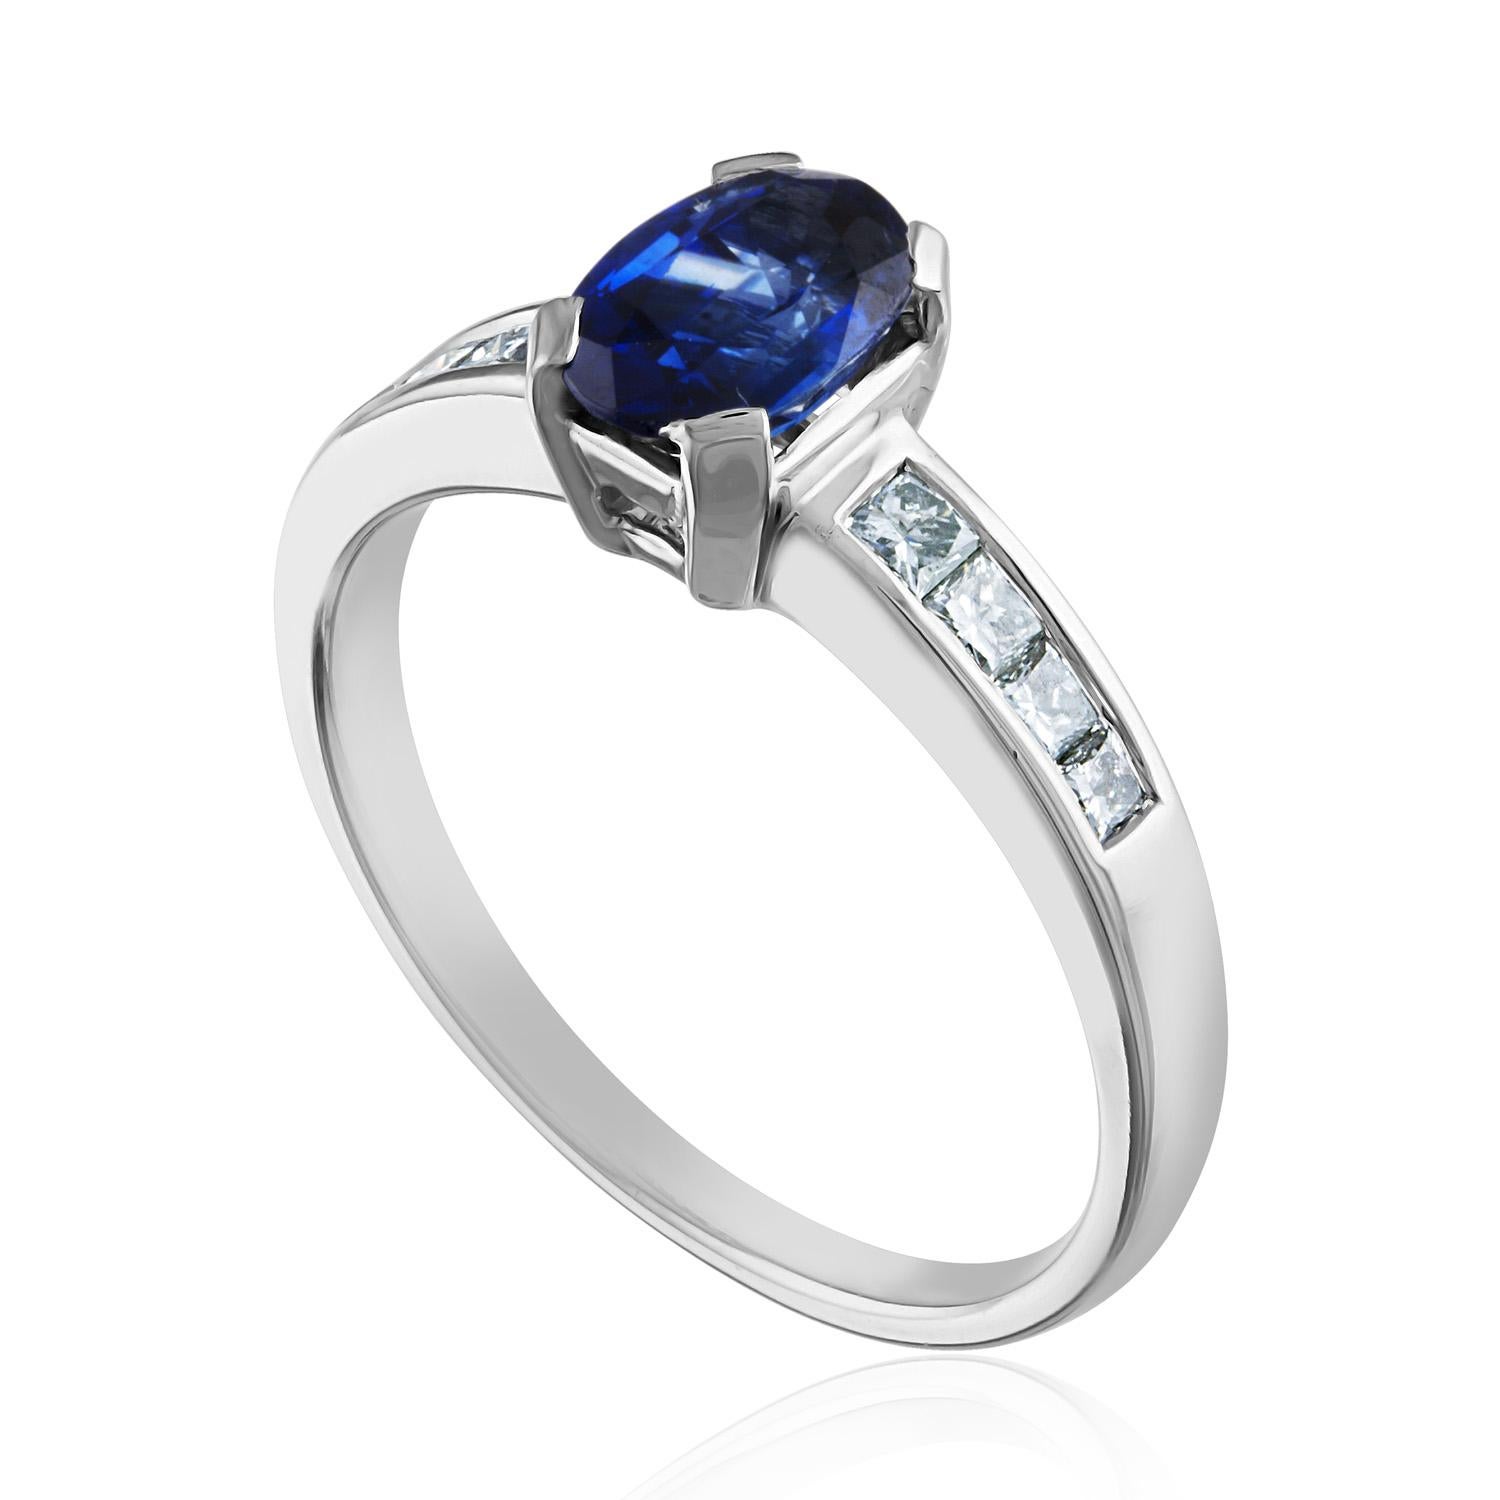 Beautiful Blue Sapphire Ring.
The ring is 18K White Gold.
The Blue Sapphire is Oval 0.98 Carat.
The stone is AGL Certified,
The stone is Heated.
There are 0.31 Carat Diamonds F/G VS/SI.
The ring is a size 6.50, sizable.
The ring weighs 3.3 grams